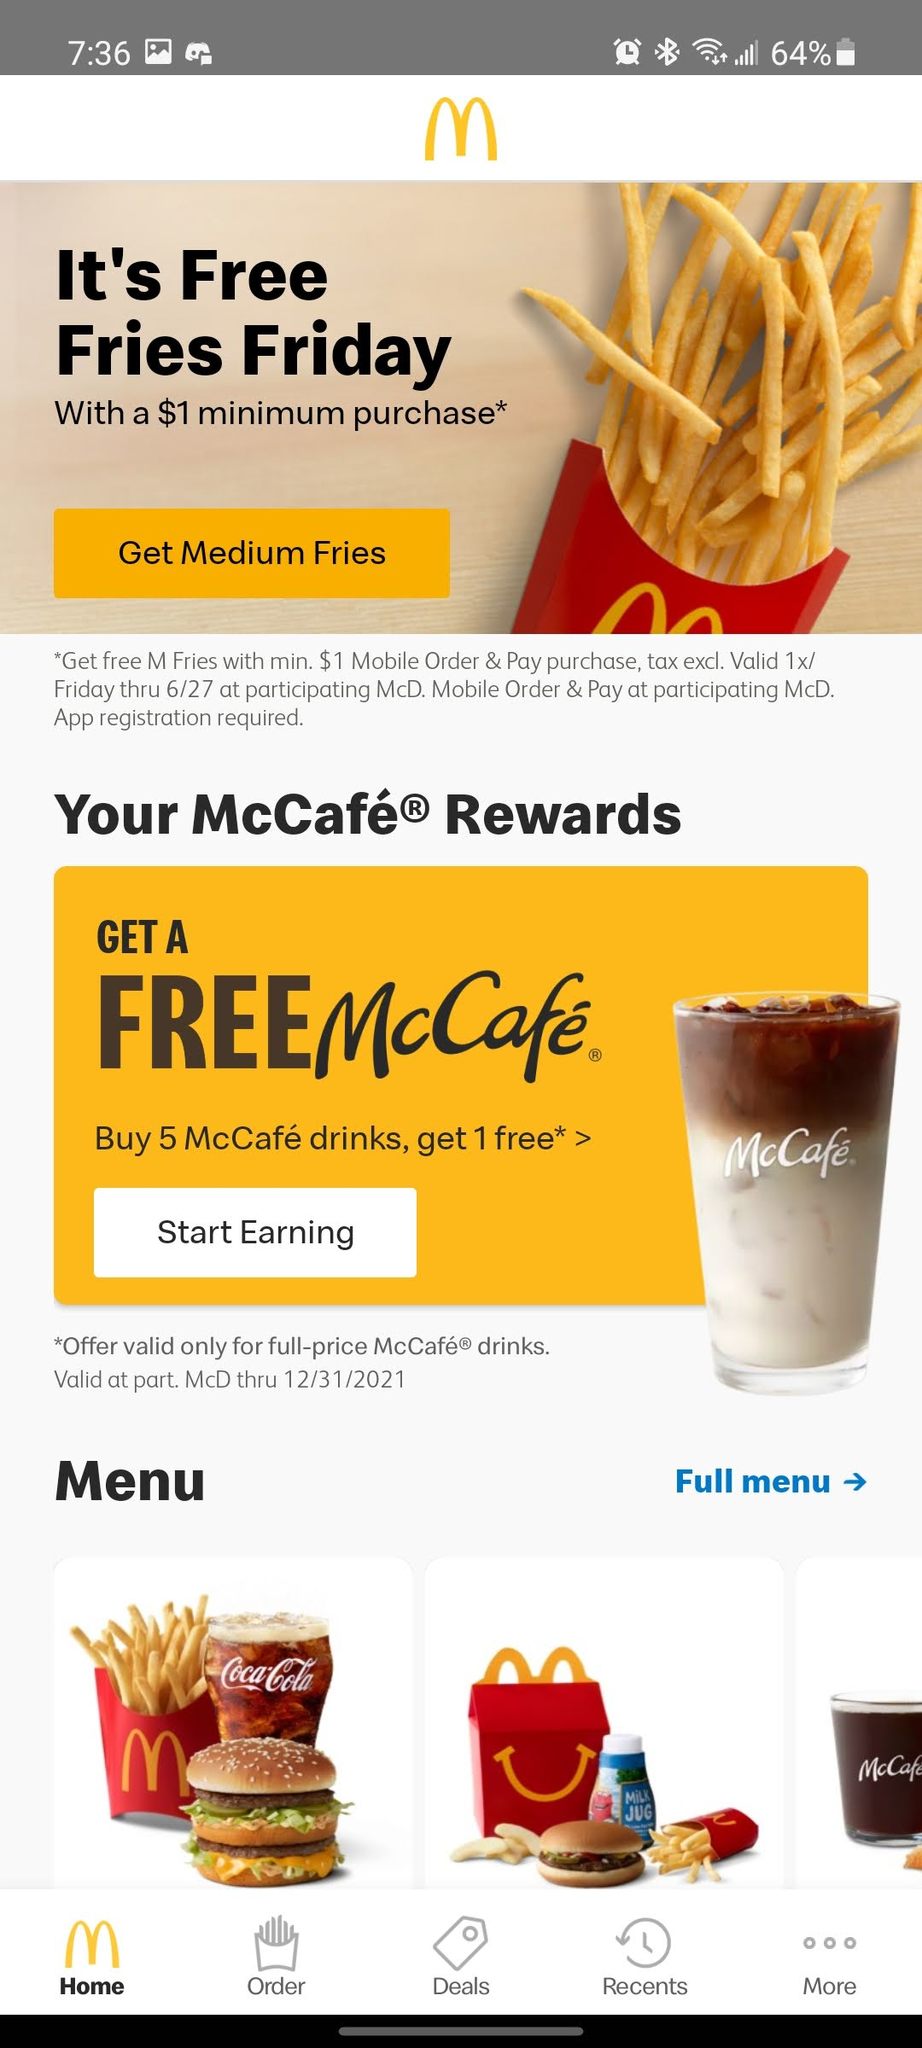 McDonalds App gamification with free stuff